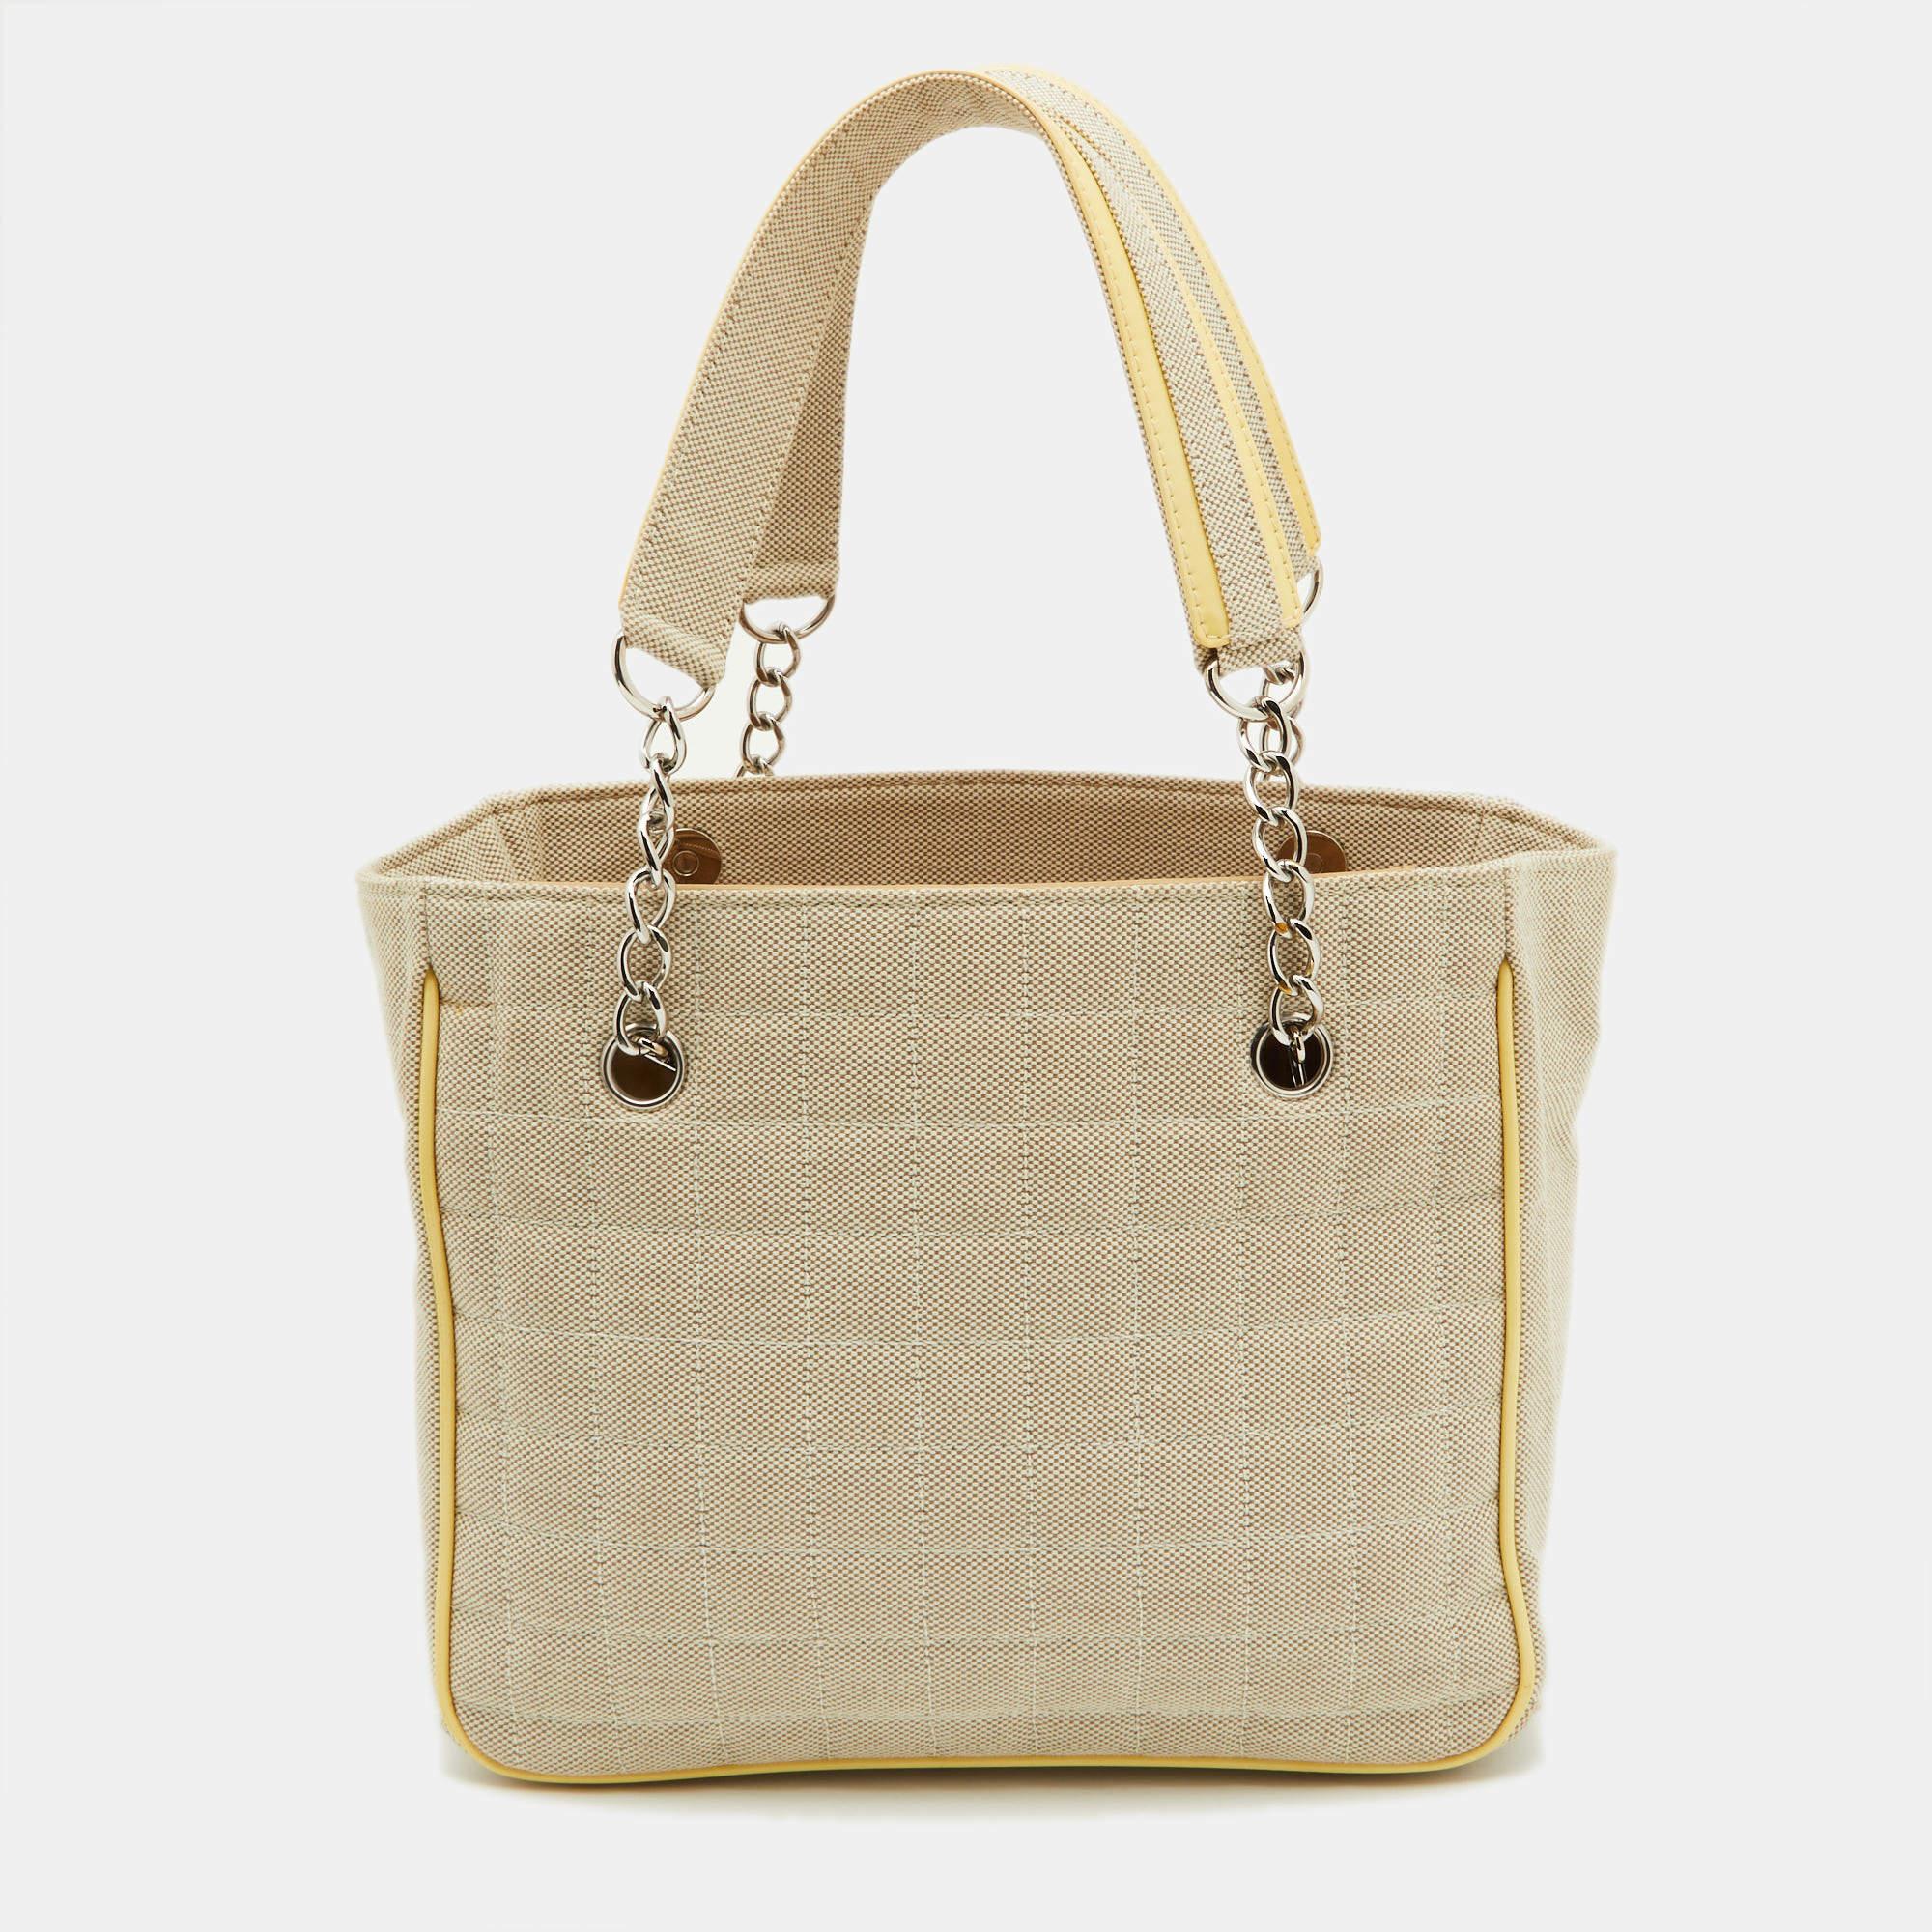 Chanel Beige/Yellow Canvas and Patent Leather Camellia No.5 Tote 3